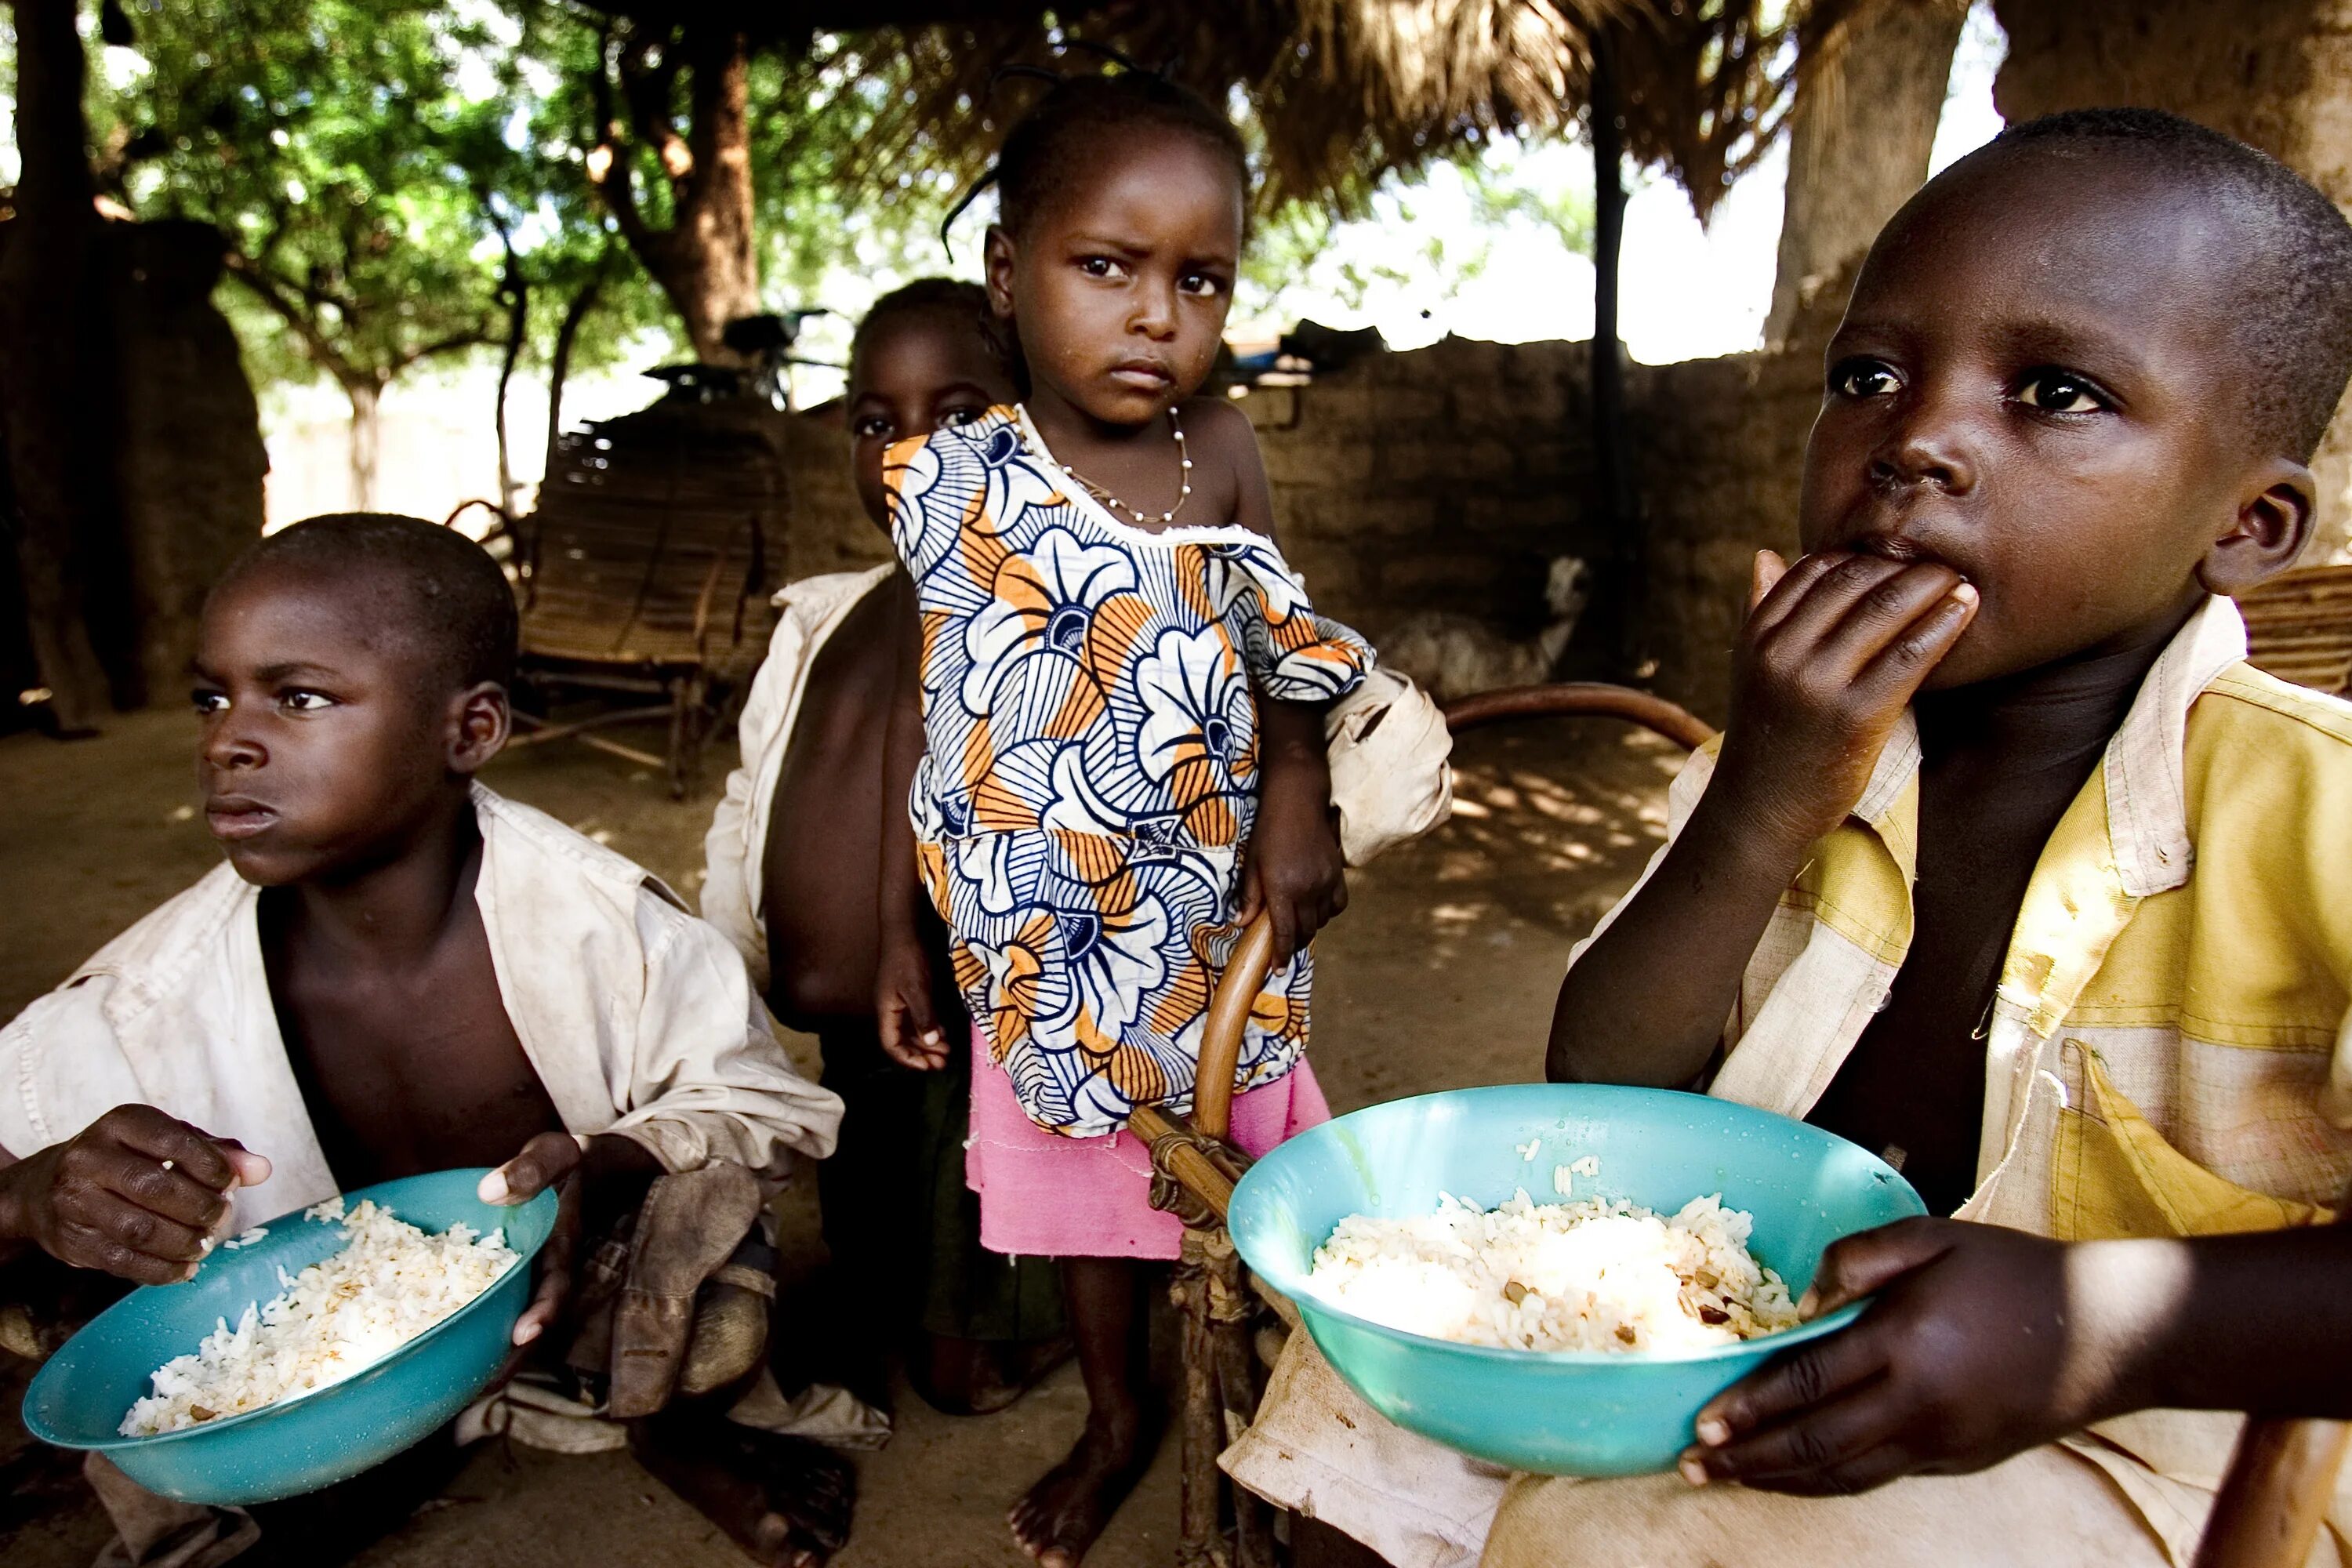 Бесплатное голод. Developing Hunger. Food Security in Africa. Charity on Africa food. WFP.